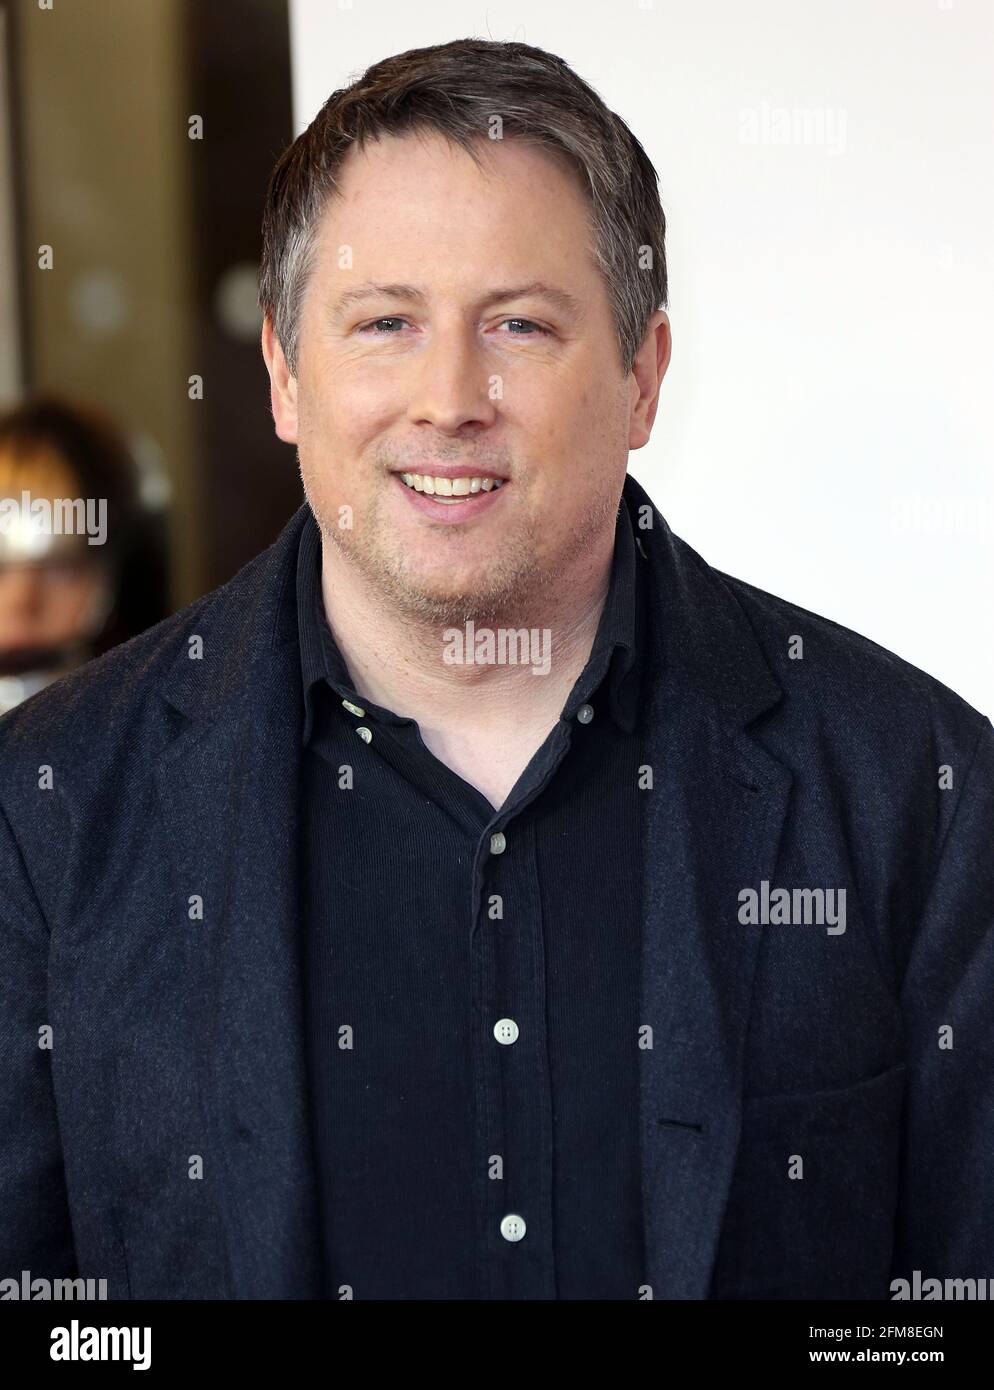 03 févr. 2019 - Londres, Angleterre, Royaume-Uni - The Kid When who serait King Family Gala screening Photos: Joe Cornish Banque D'Images